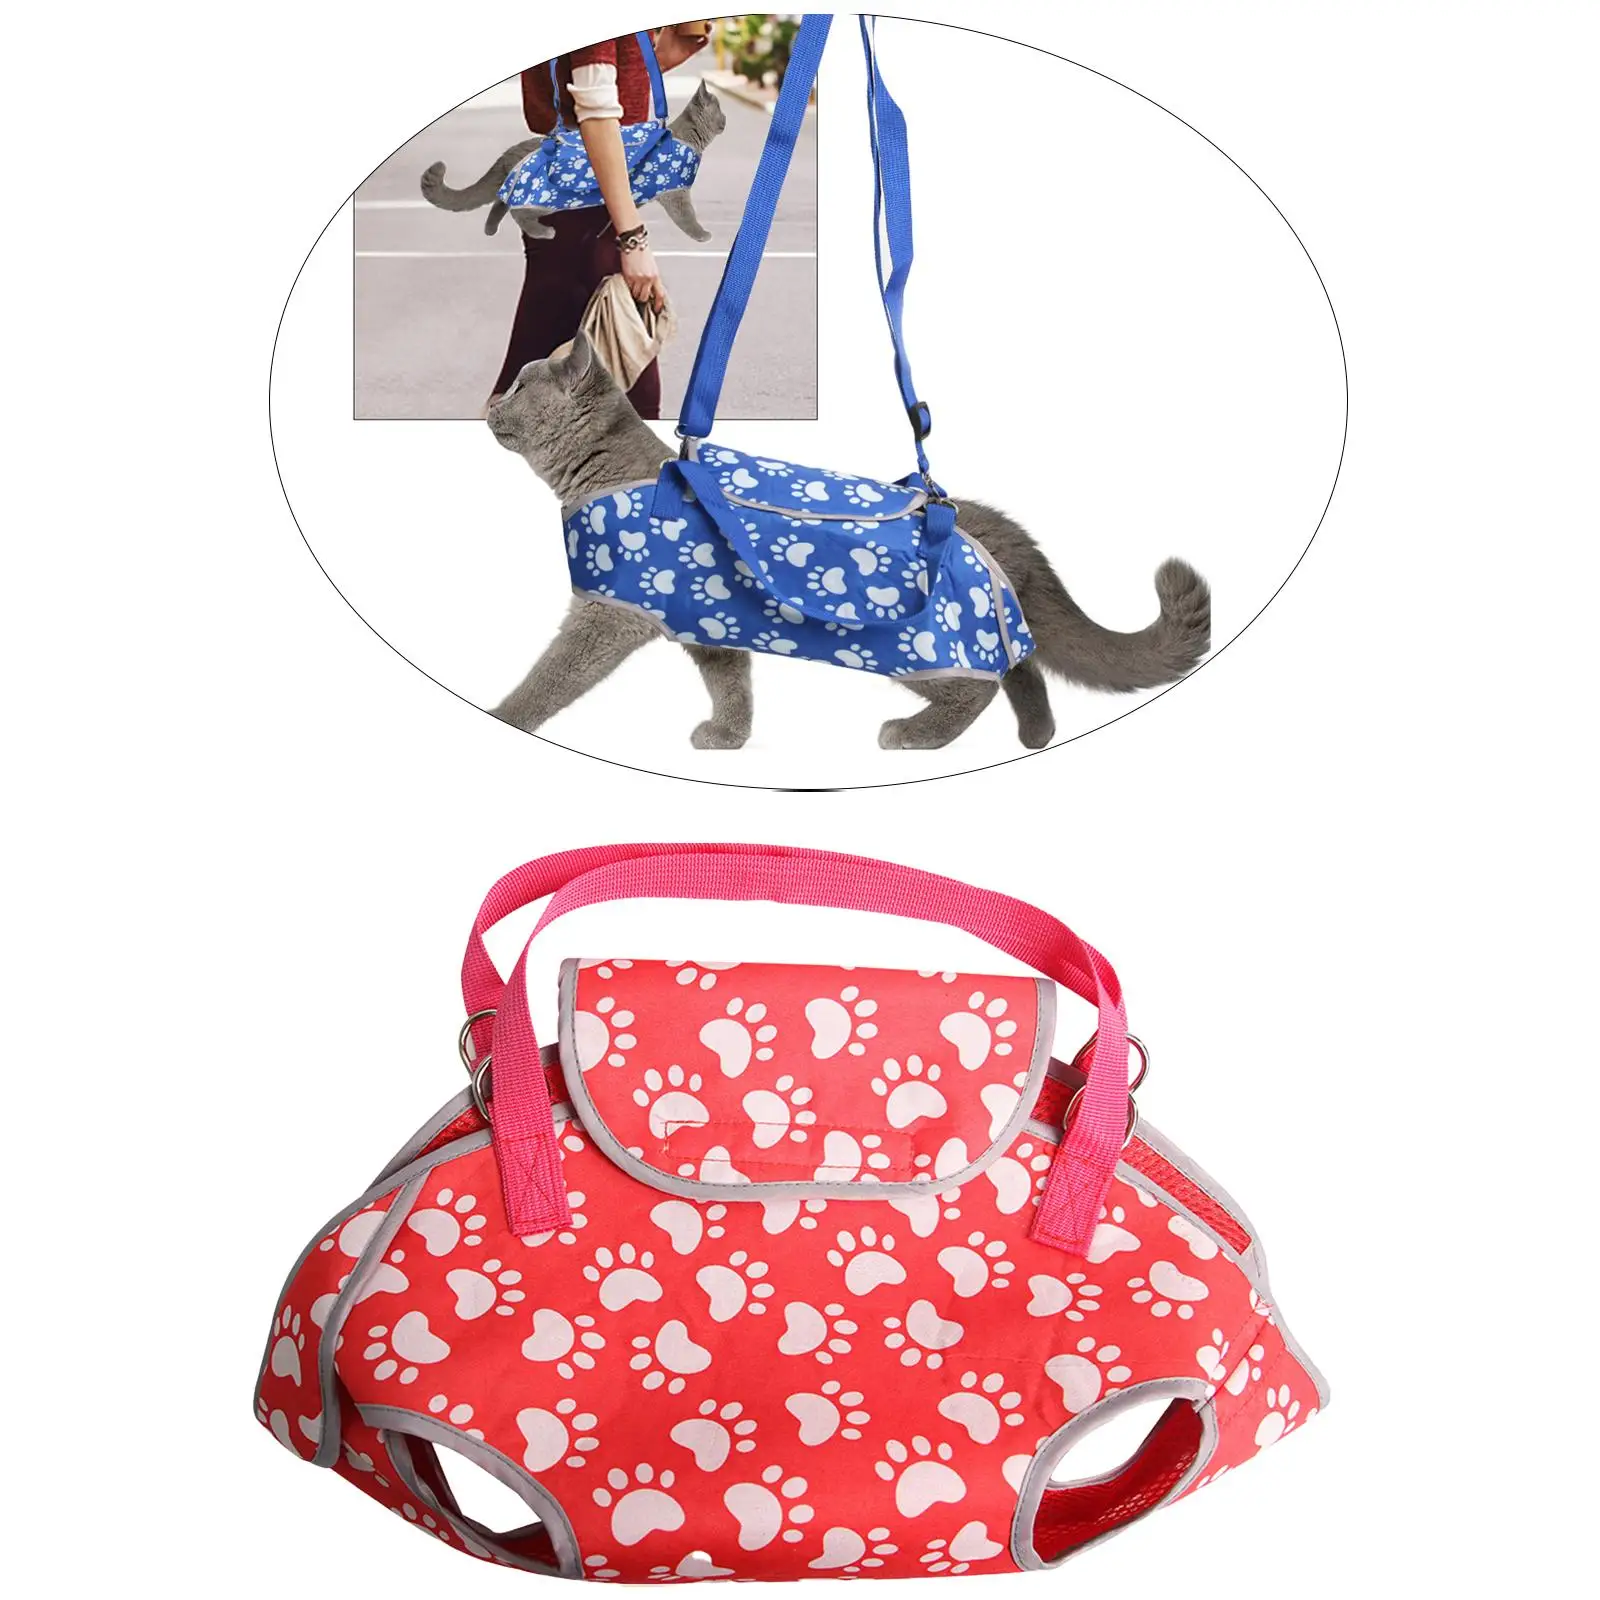 Travel Bag Carrying Bag Tote Handbag Kennel Cat Carrier Leg Out Pet Carrier Dog Carrier for Puppy Outdoor Hiking Traveling Kitty